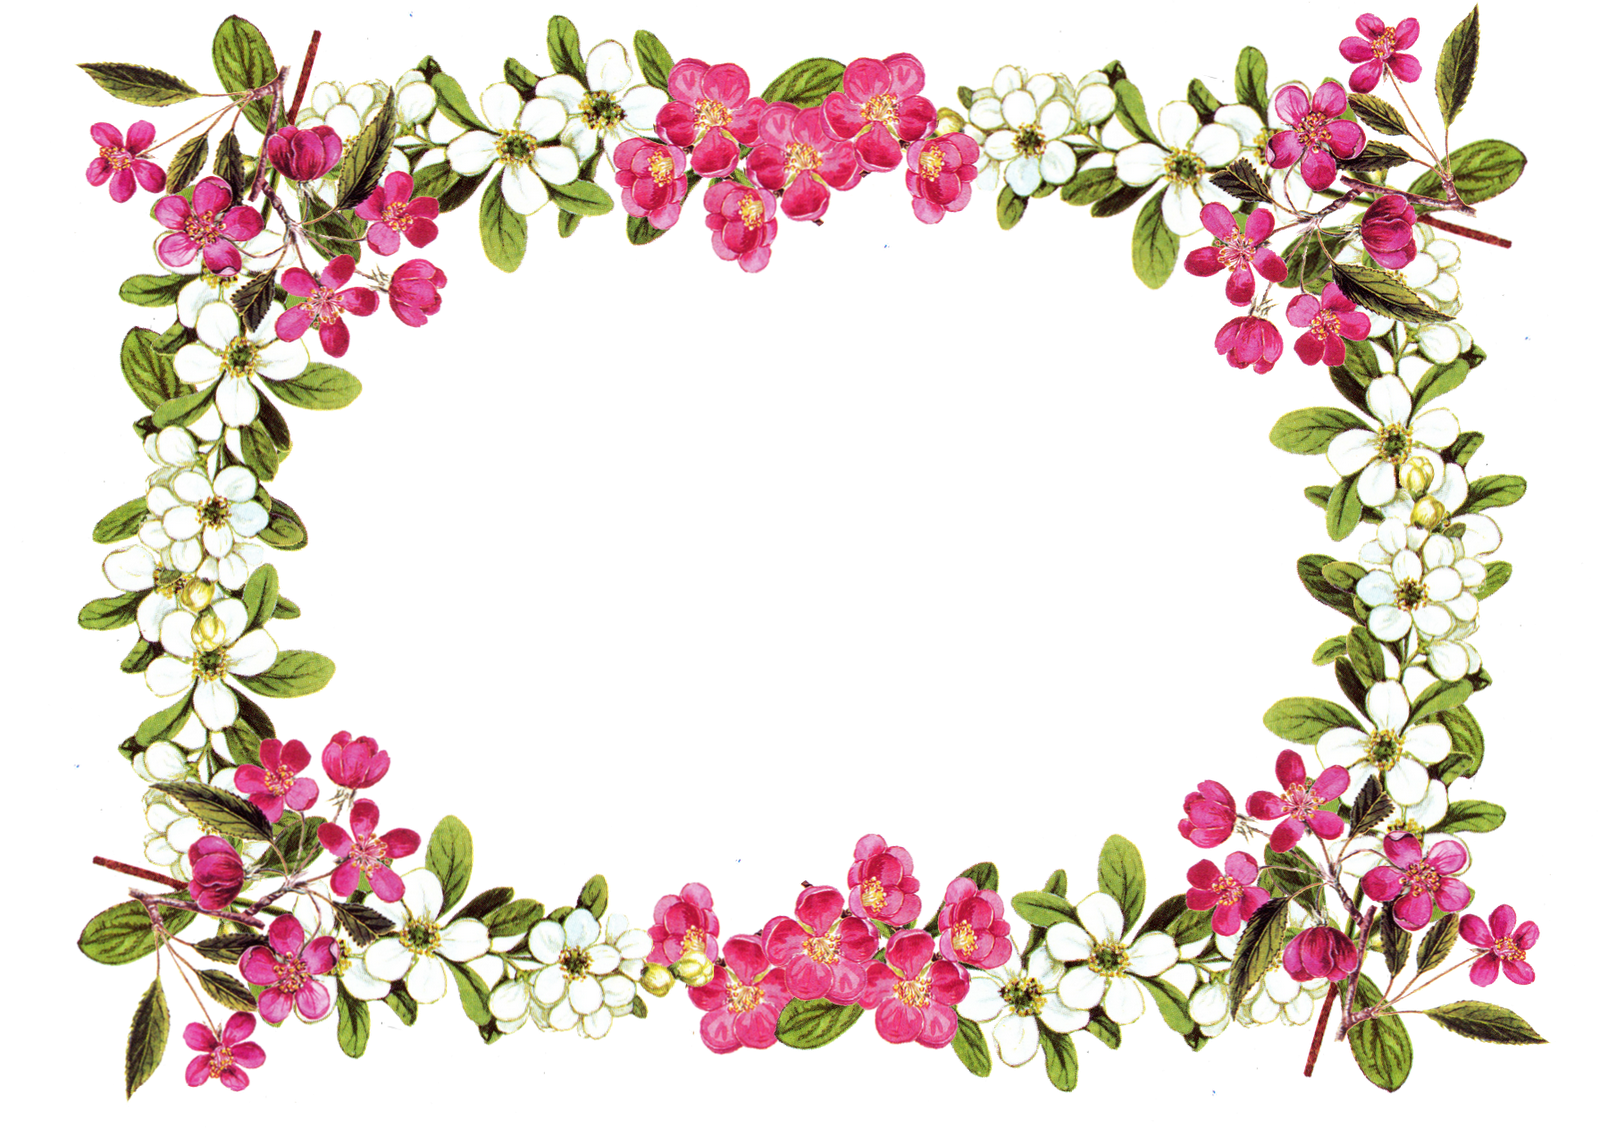 Elegant Free Flower Border Image. Top Collection of different types of flowers in the image HD